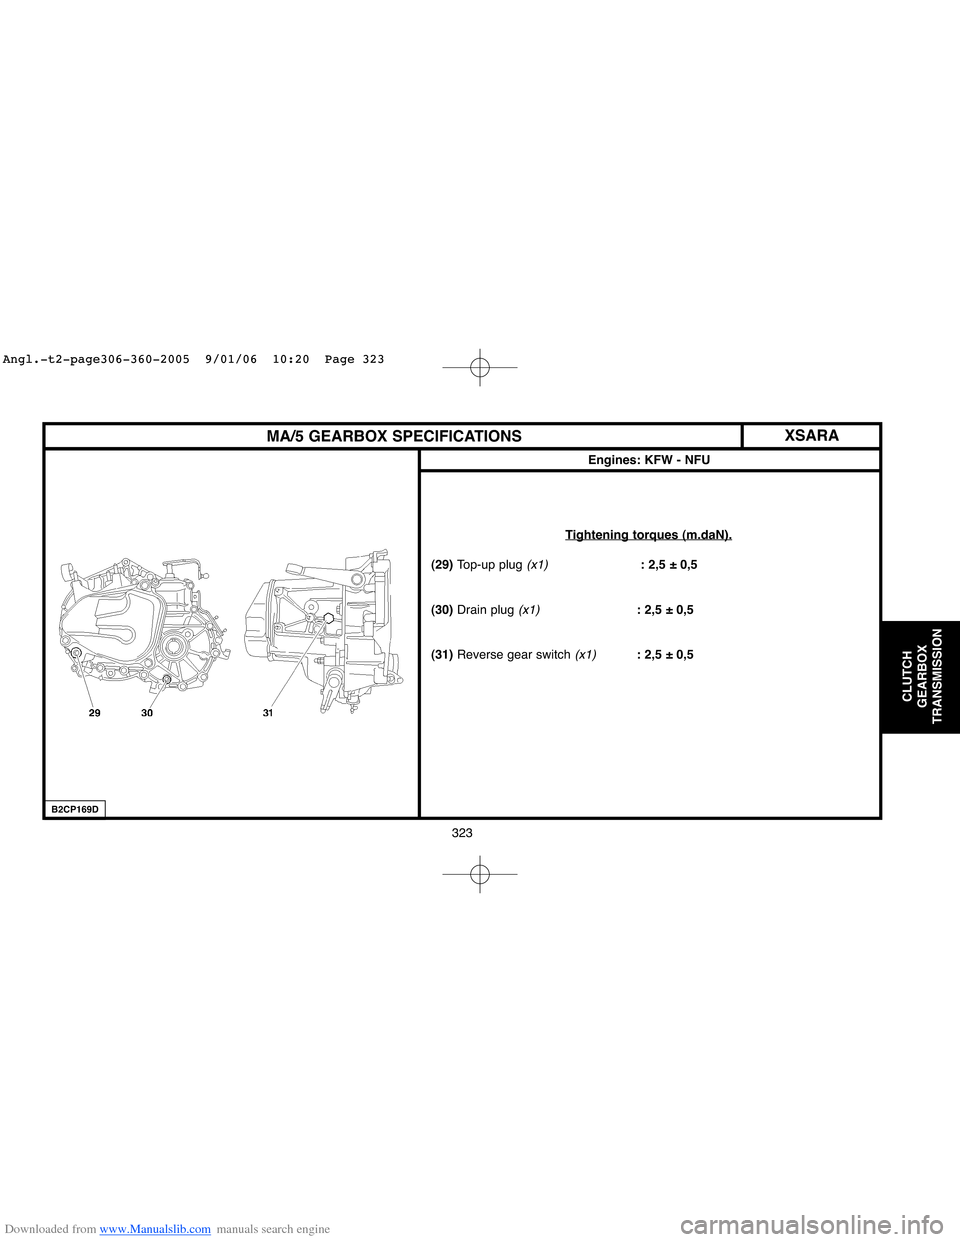 Citroen XSARA 2005 1.G Service Manual Downloaded from www.Manualslib.com manuals search engine 323
CLUTCH
GEARBOX
TRANSMISSION
MA/5 GEARBOX SPECIFICATIONS
Engines: KFW - NFU
Tightening torques (m.daN).
(29) Top-up plug (x1): 2,5 ± 0,5
(3